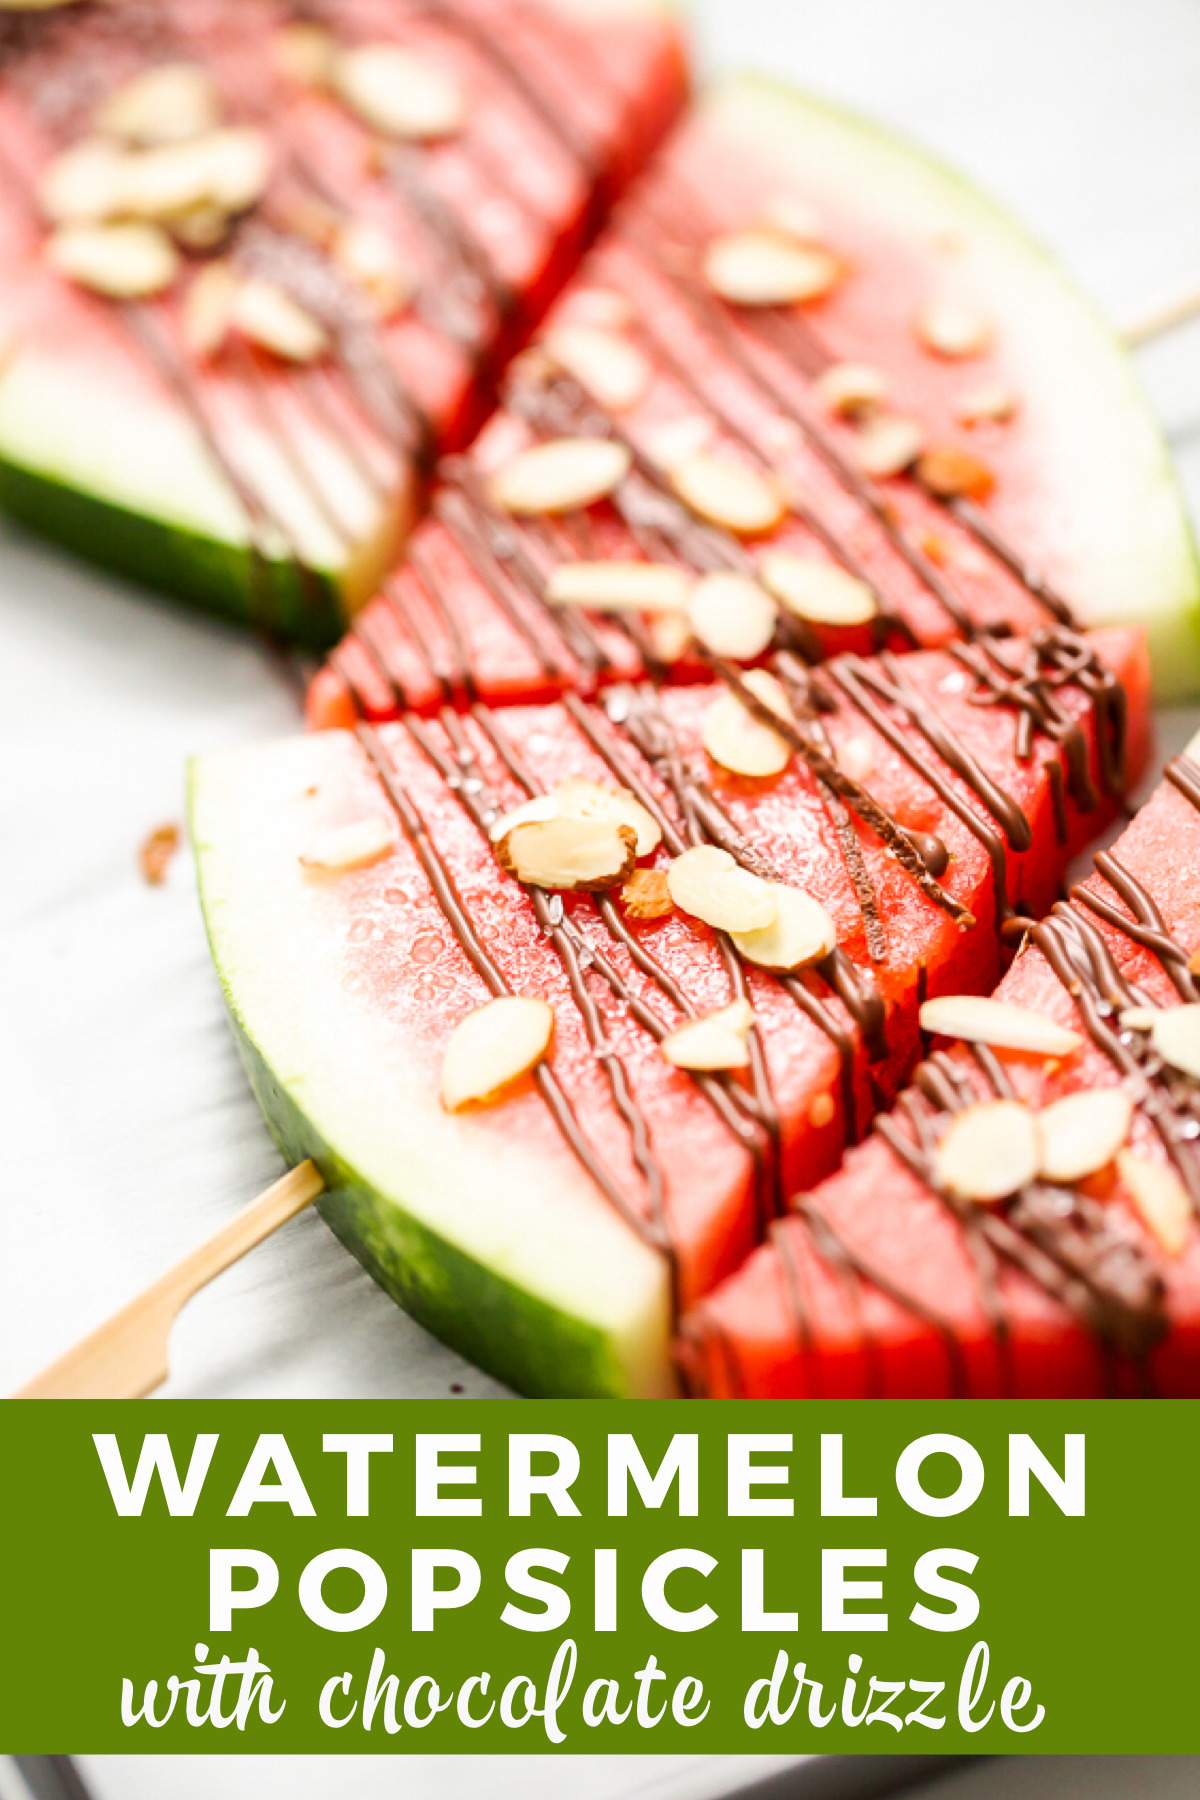 Watermelon Popsicles with Chocolate Drizzle